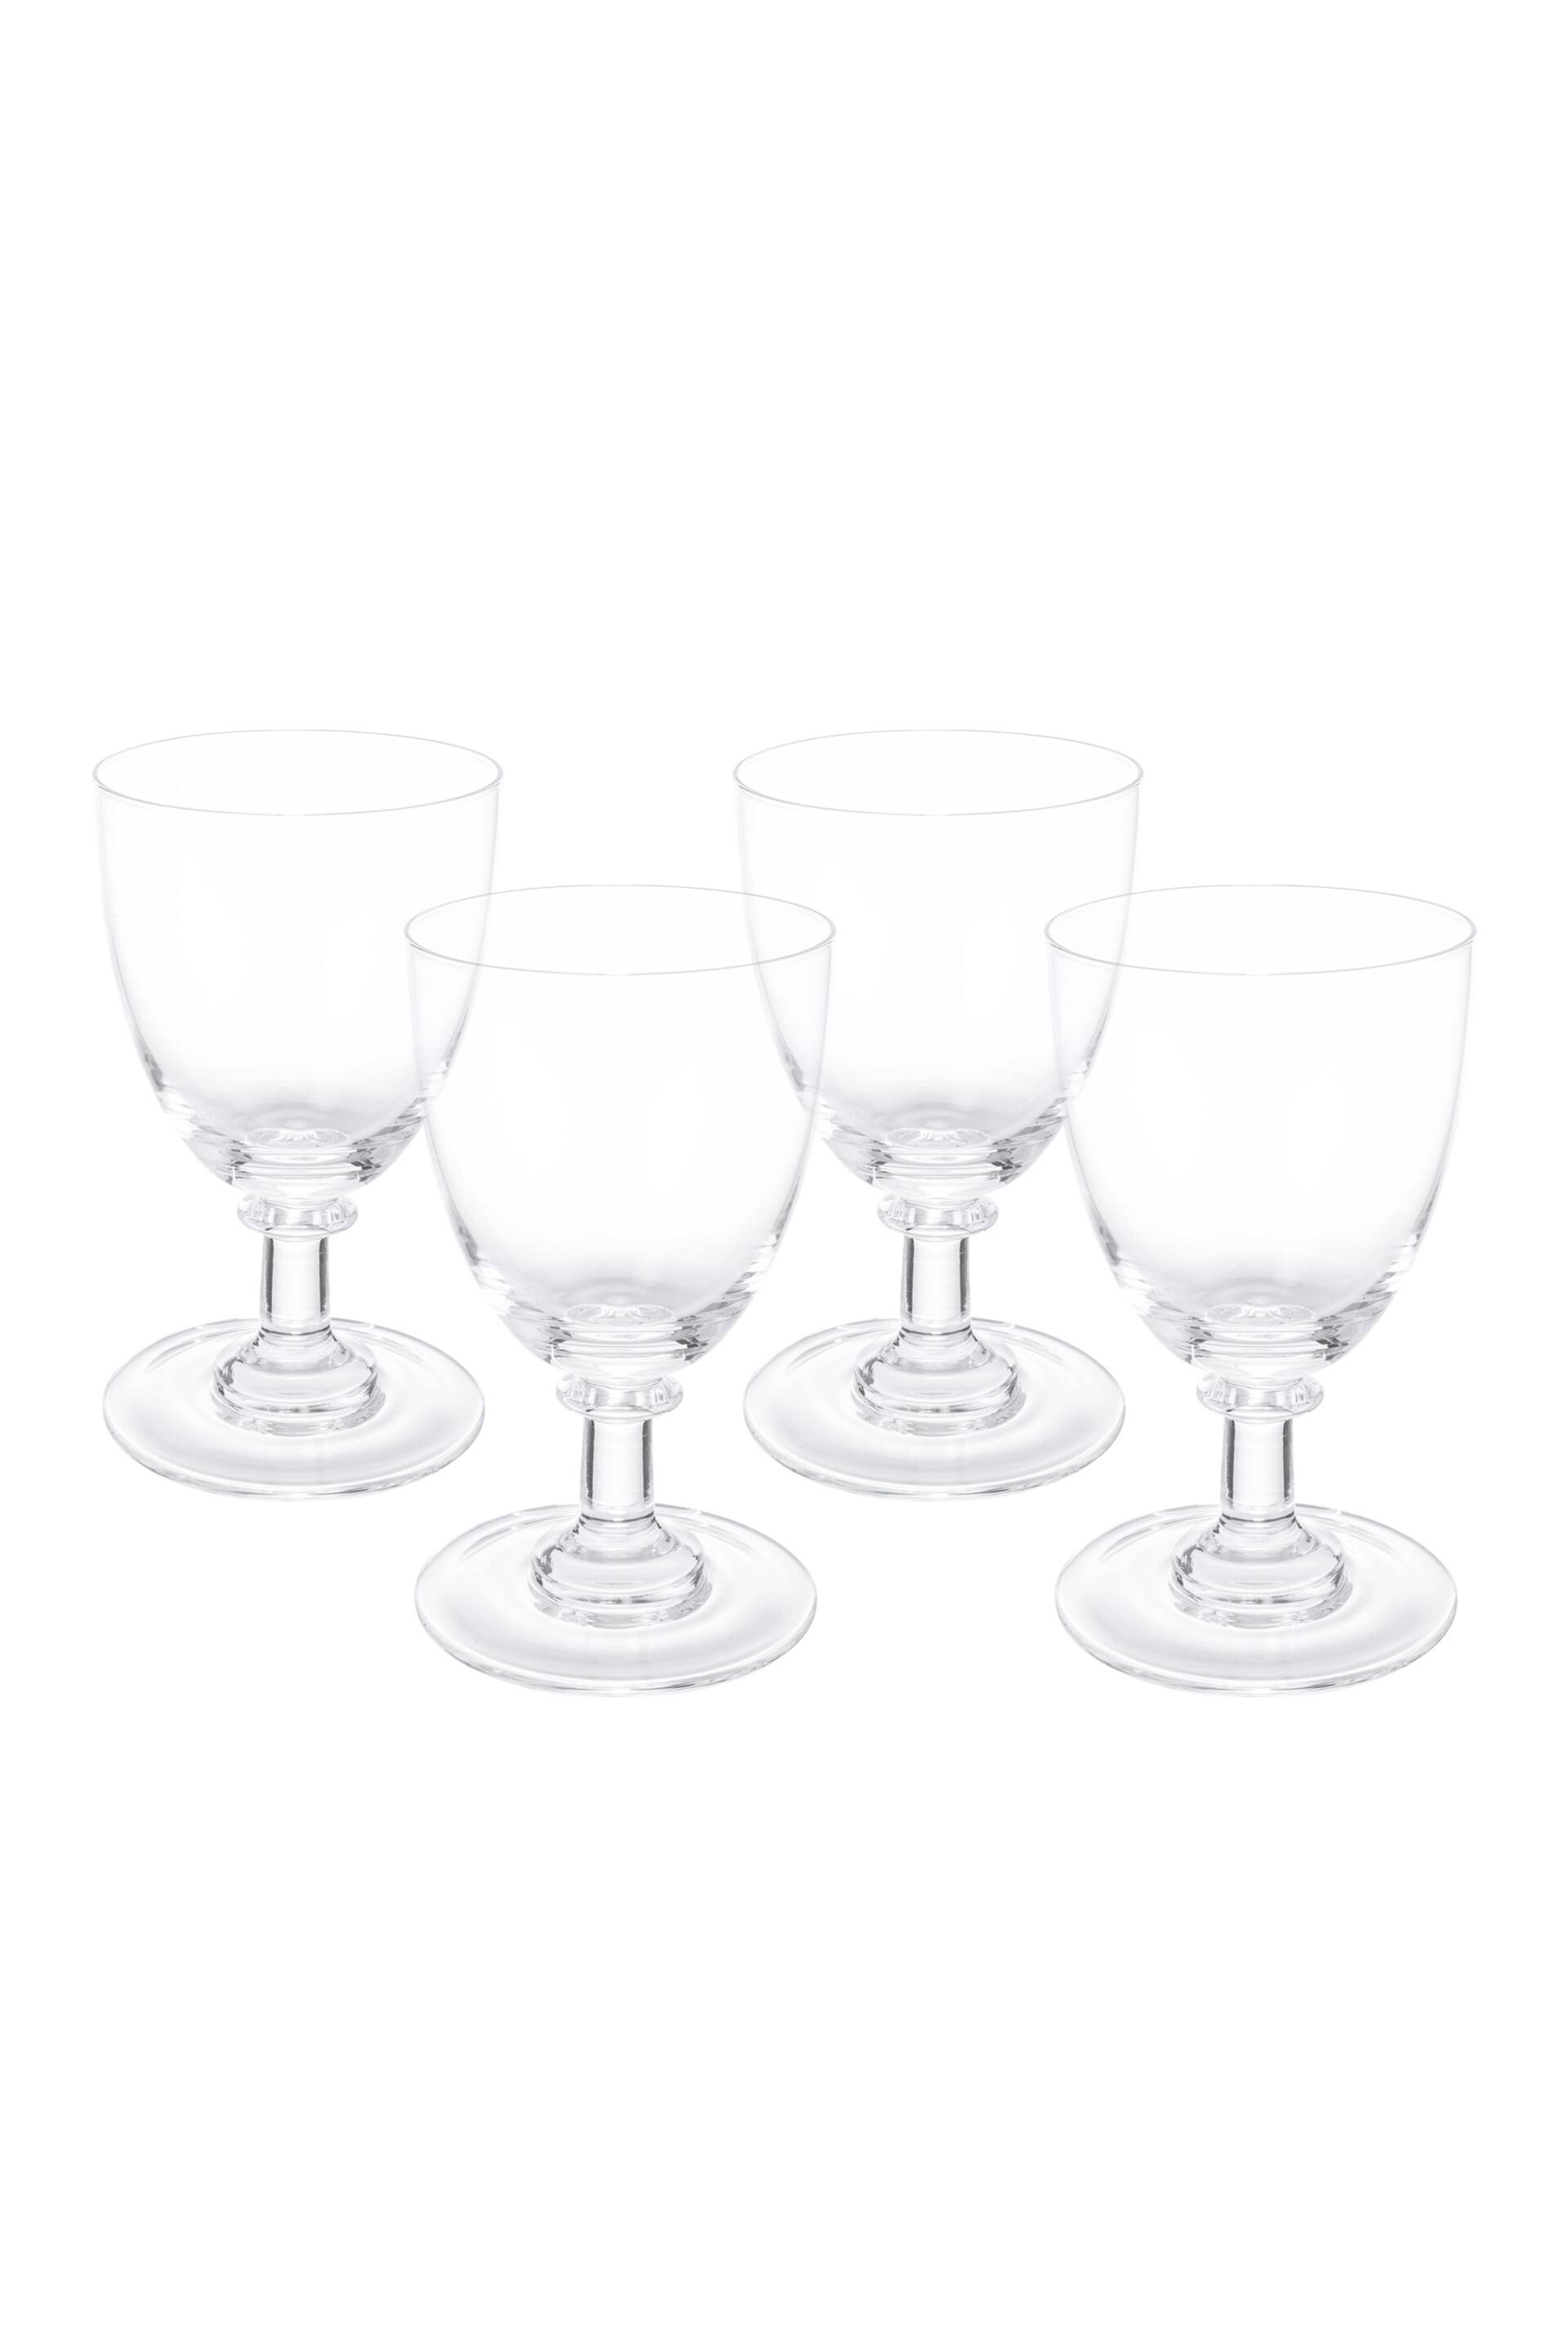 Mary Berry Set of 4 Clear Signature Red Wine Glasses - Image 2 of 4